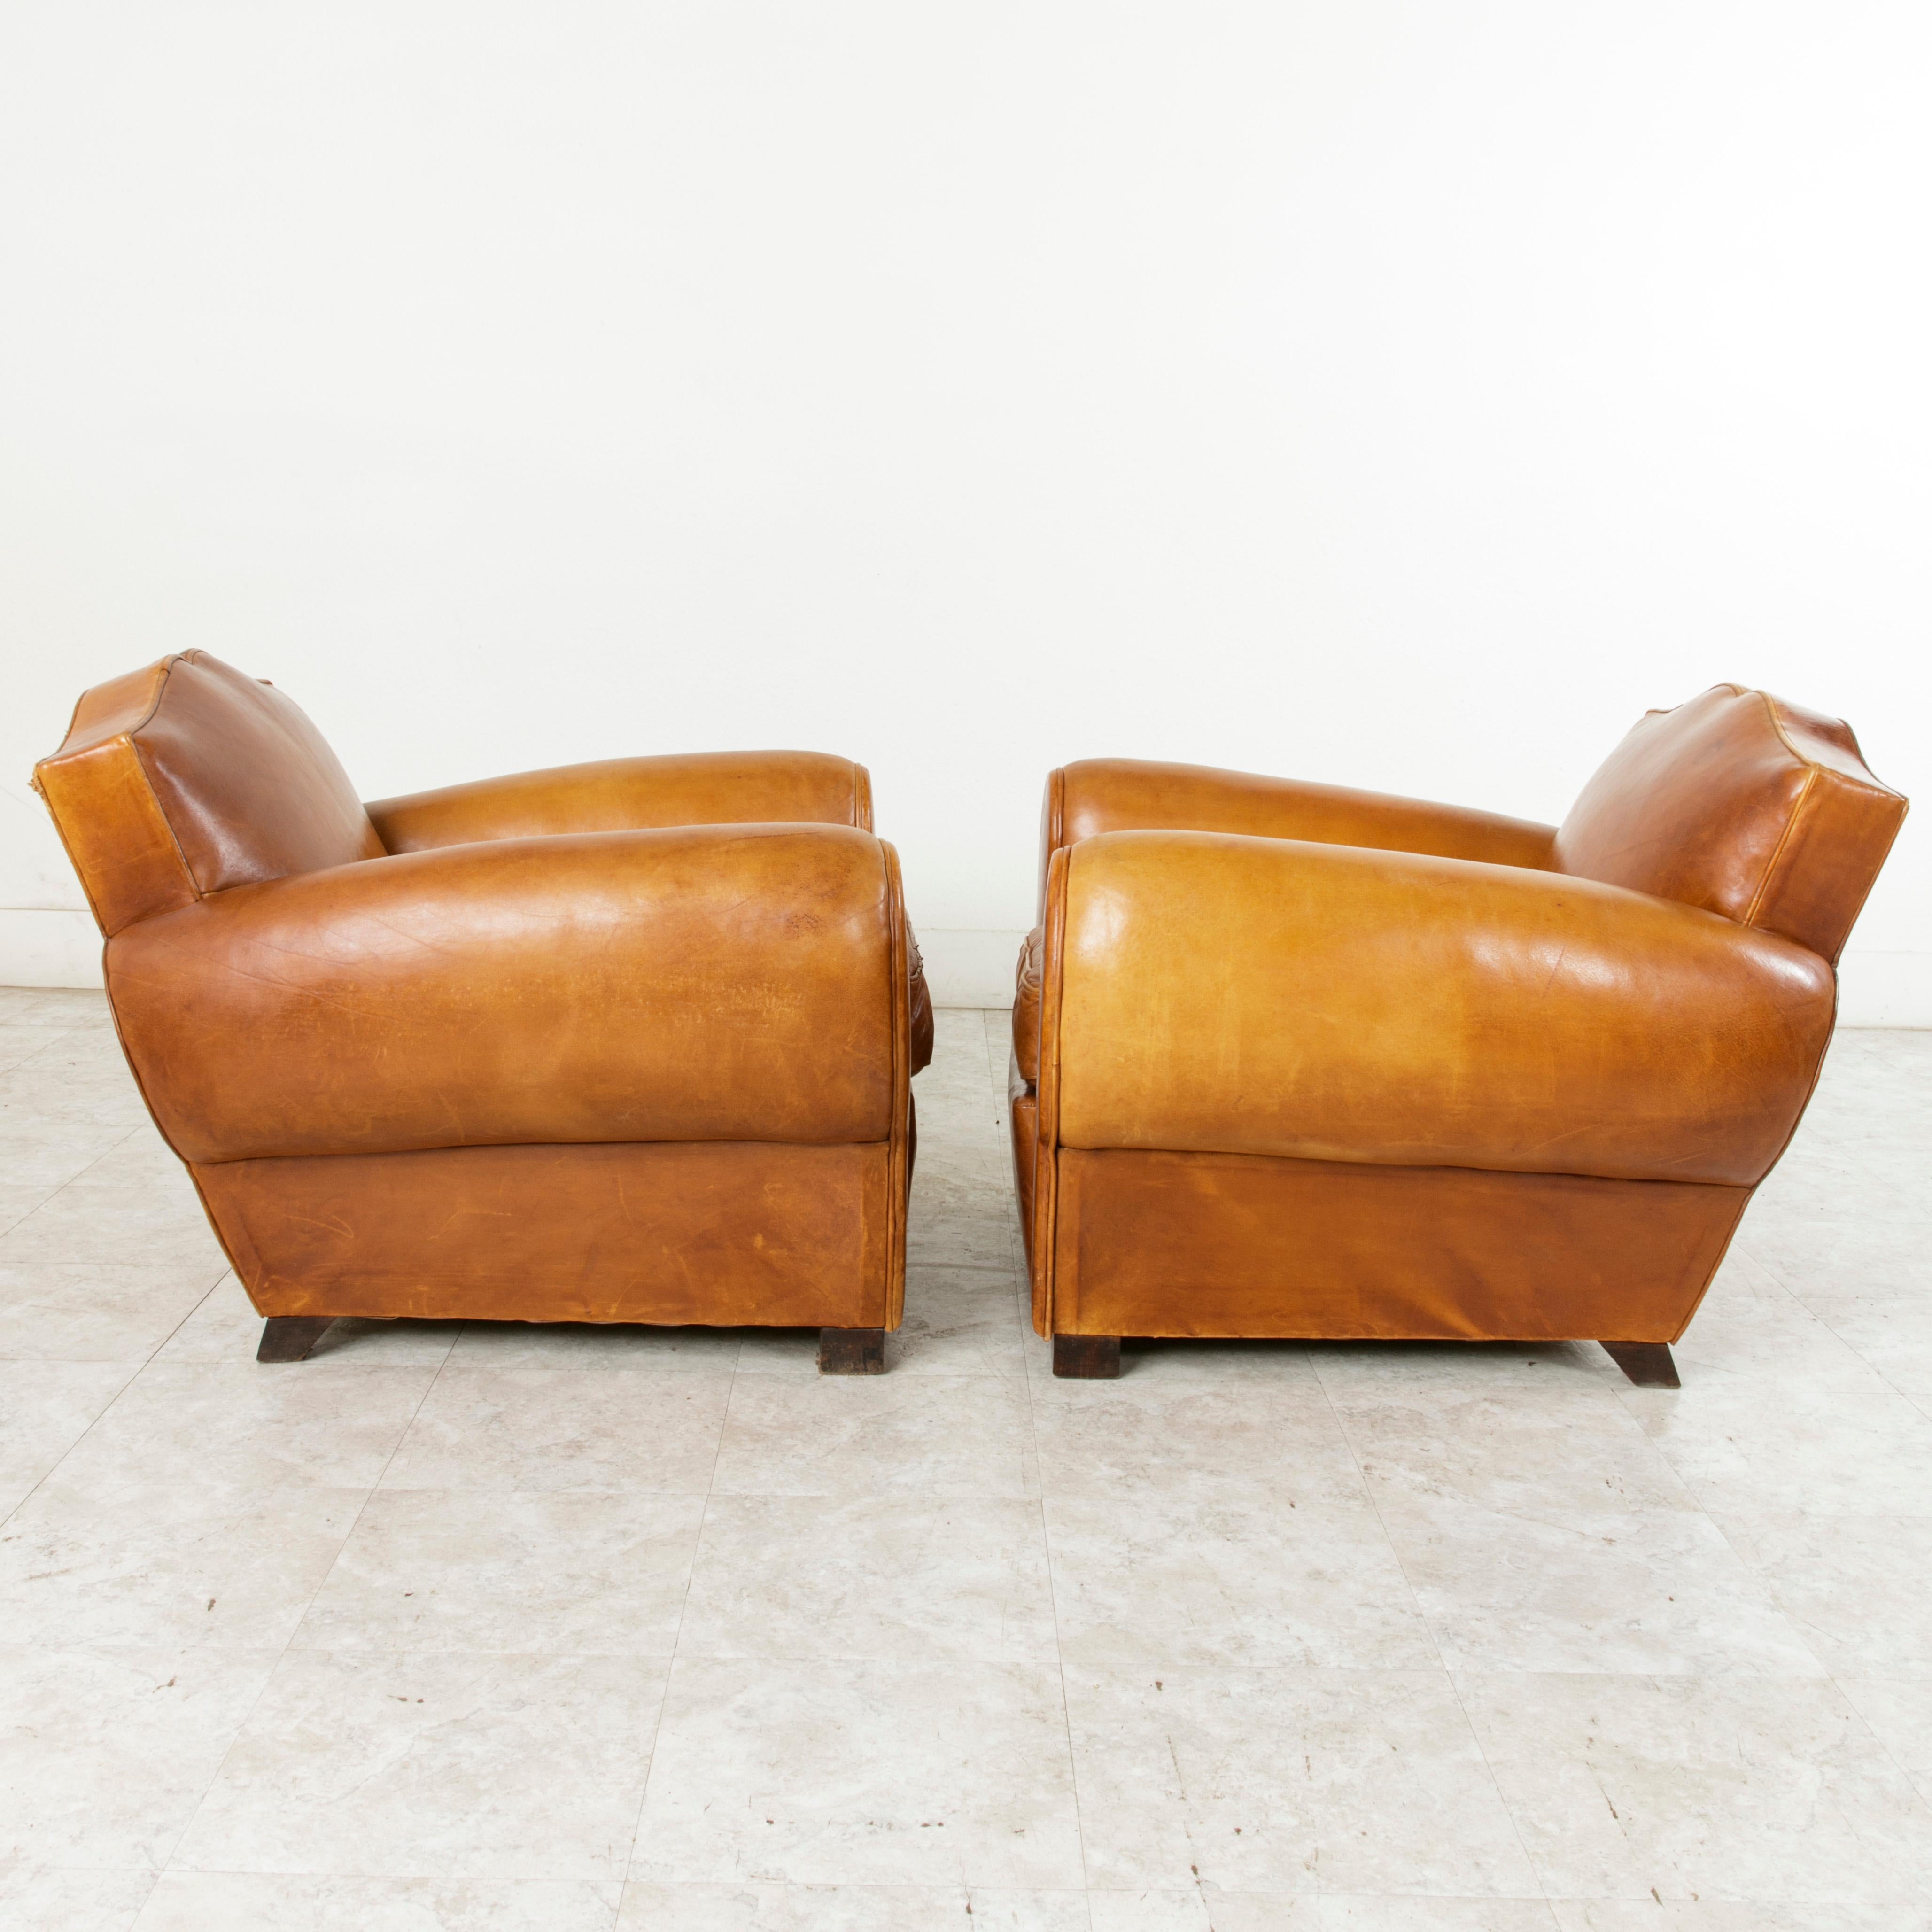 Pair of French Art Deco Leather Club Chairs, Moustache Back Club Chairs 2